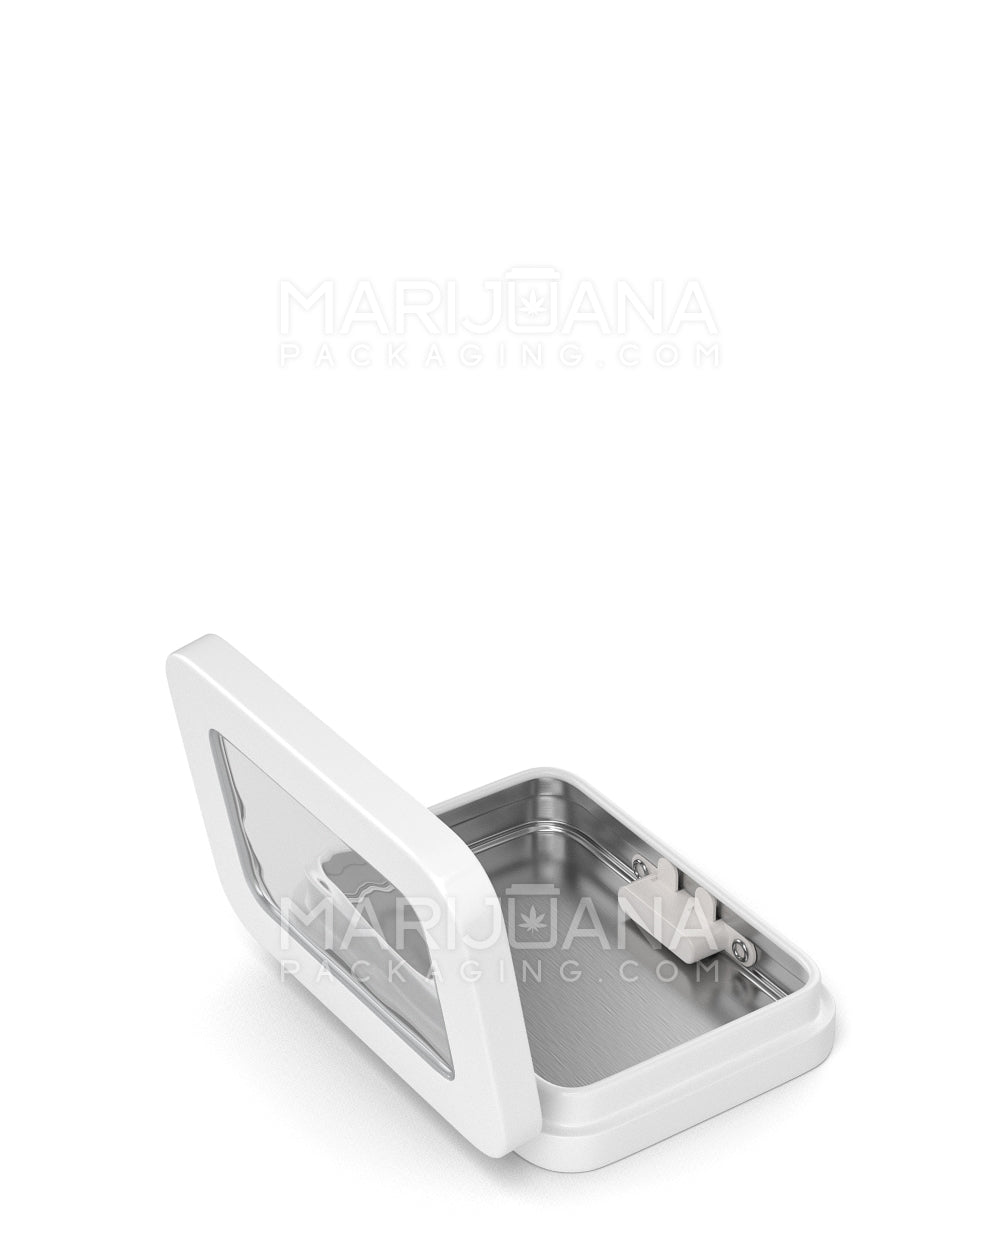 Child Resistant & Sustainable | Hinged-Lid Mini Size Vista Edible & Joint Box w/ See-Through Window |  White Tin  - 7